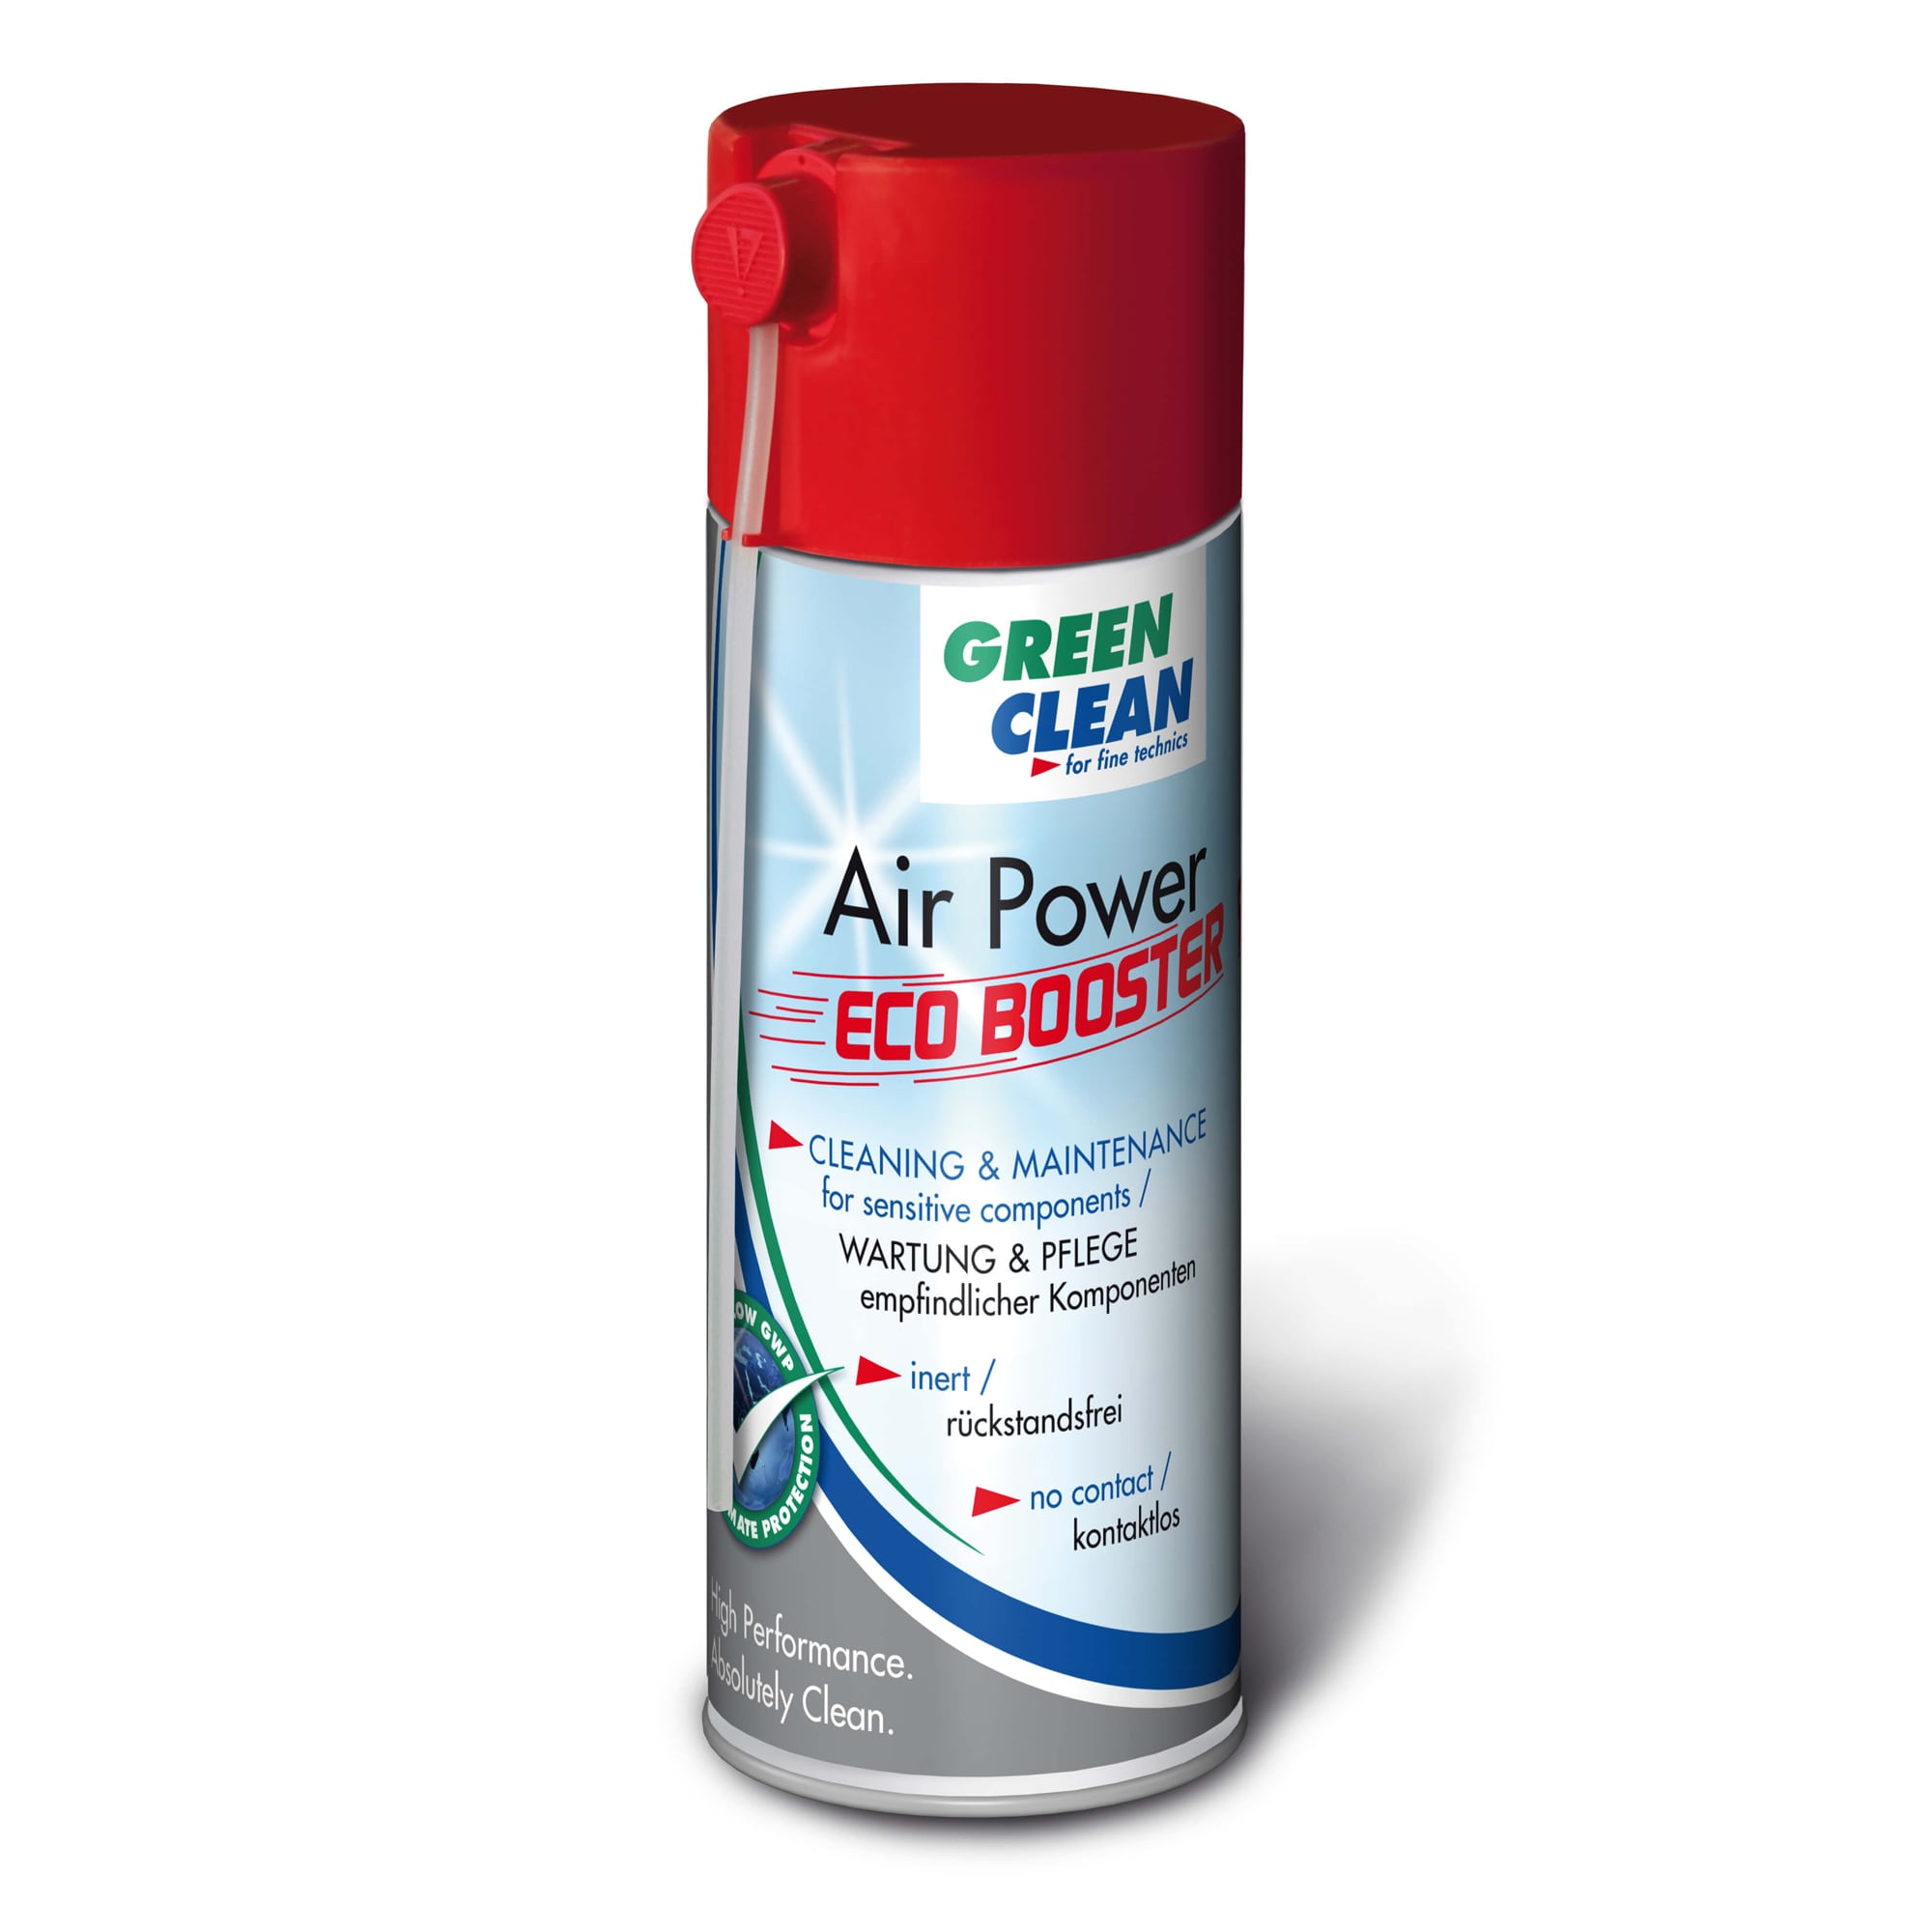 Green Clean Tryckluft 400 ml.G-2044 Air Power Eco Booster